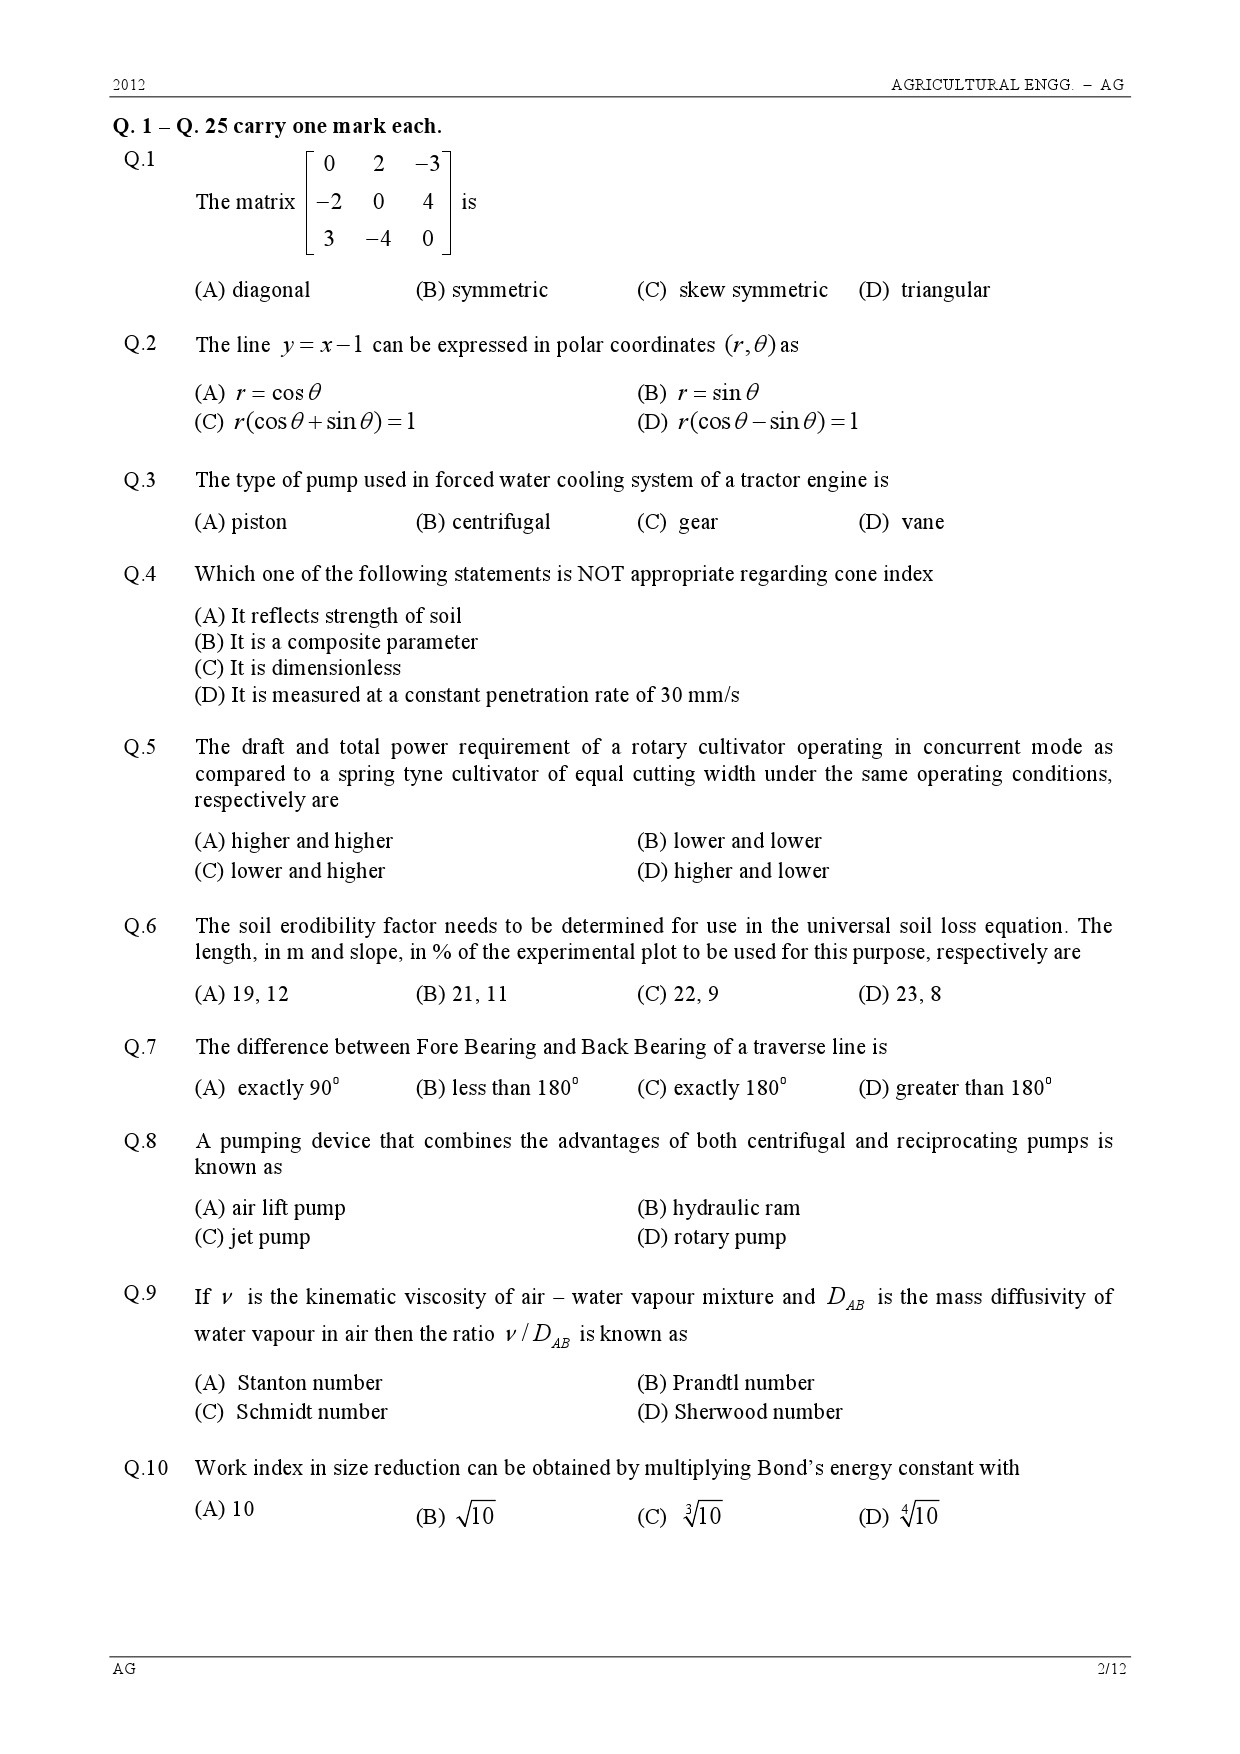 GATE Exam Question Paper 2012 Agricultural Engineering 2